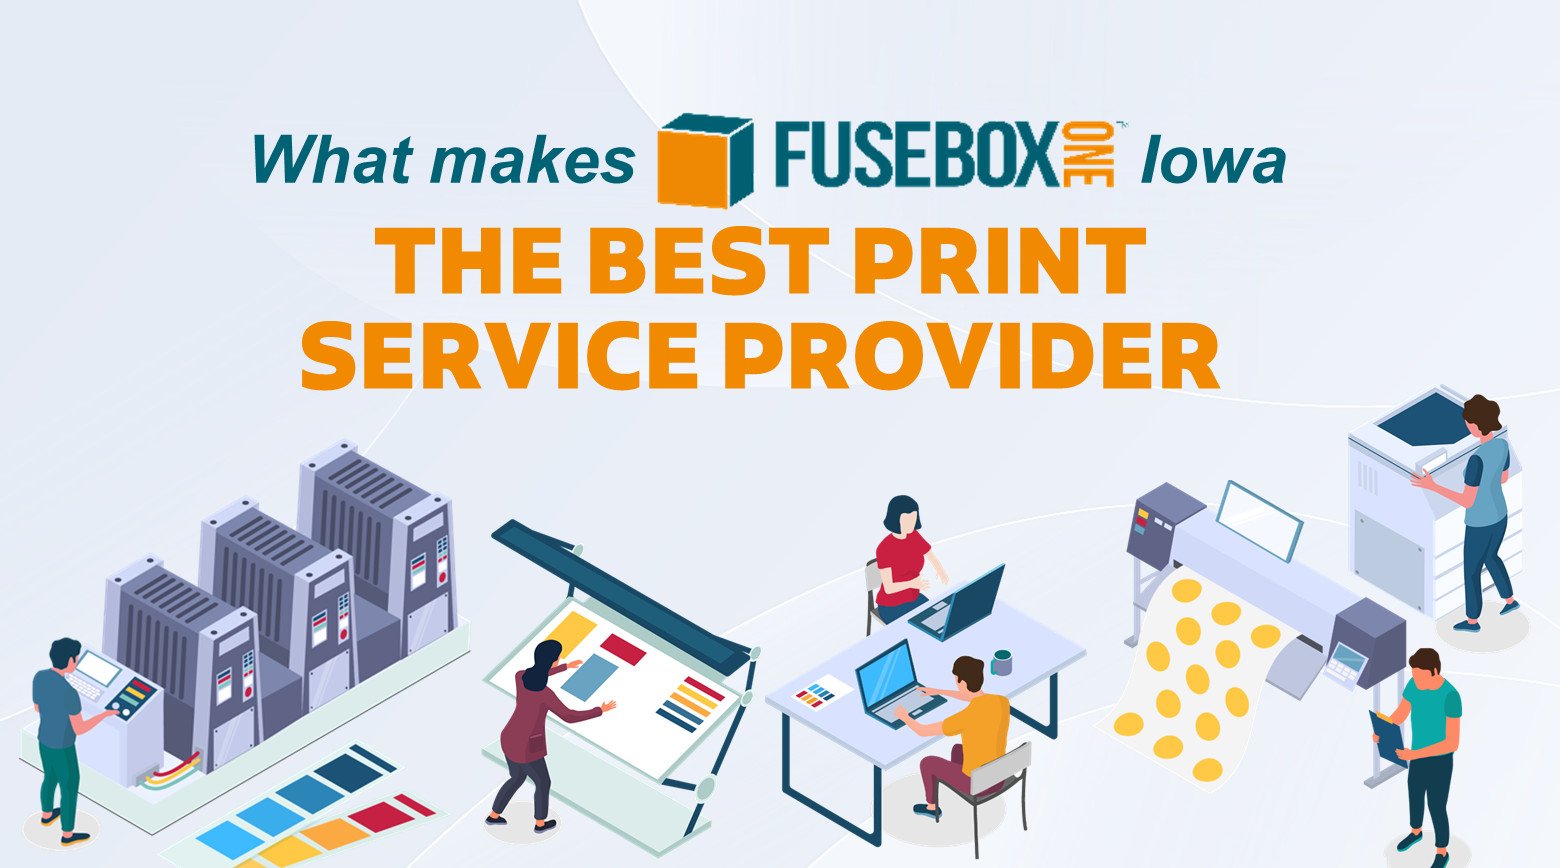 FuseBox One the best print service provider 